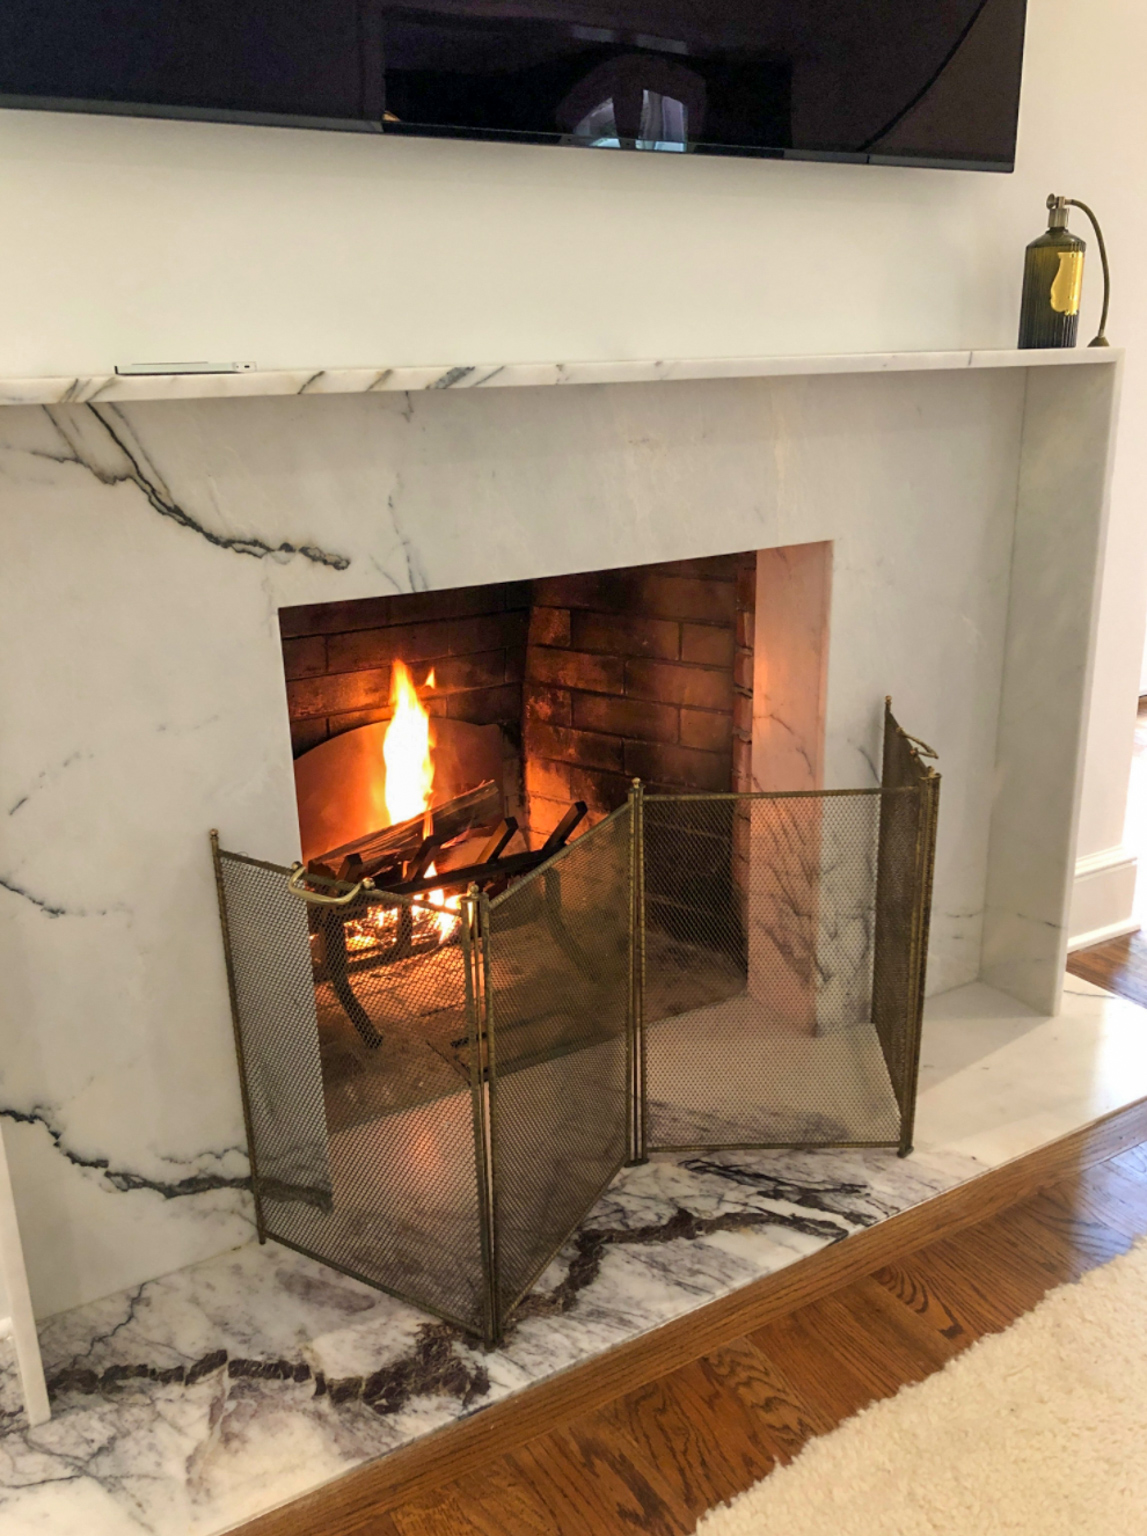 Antique French fireplace screen in a modern fireplace